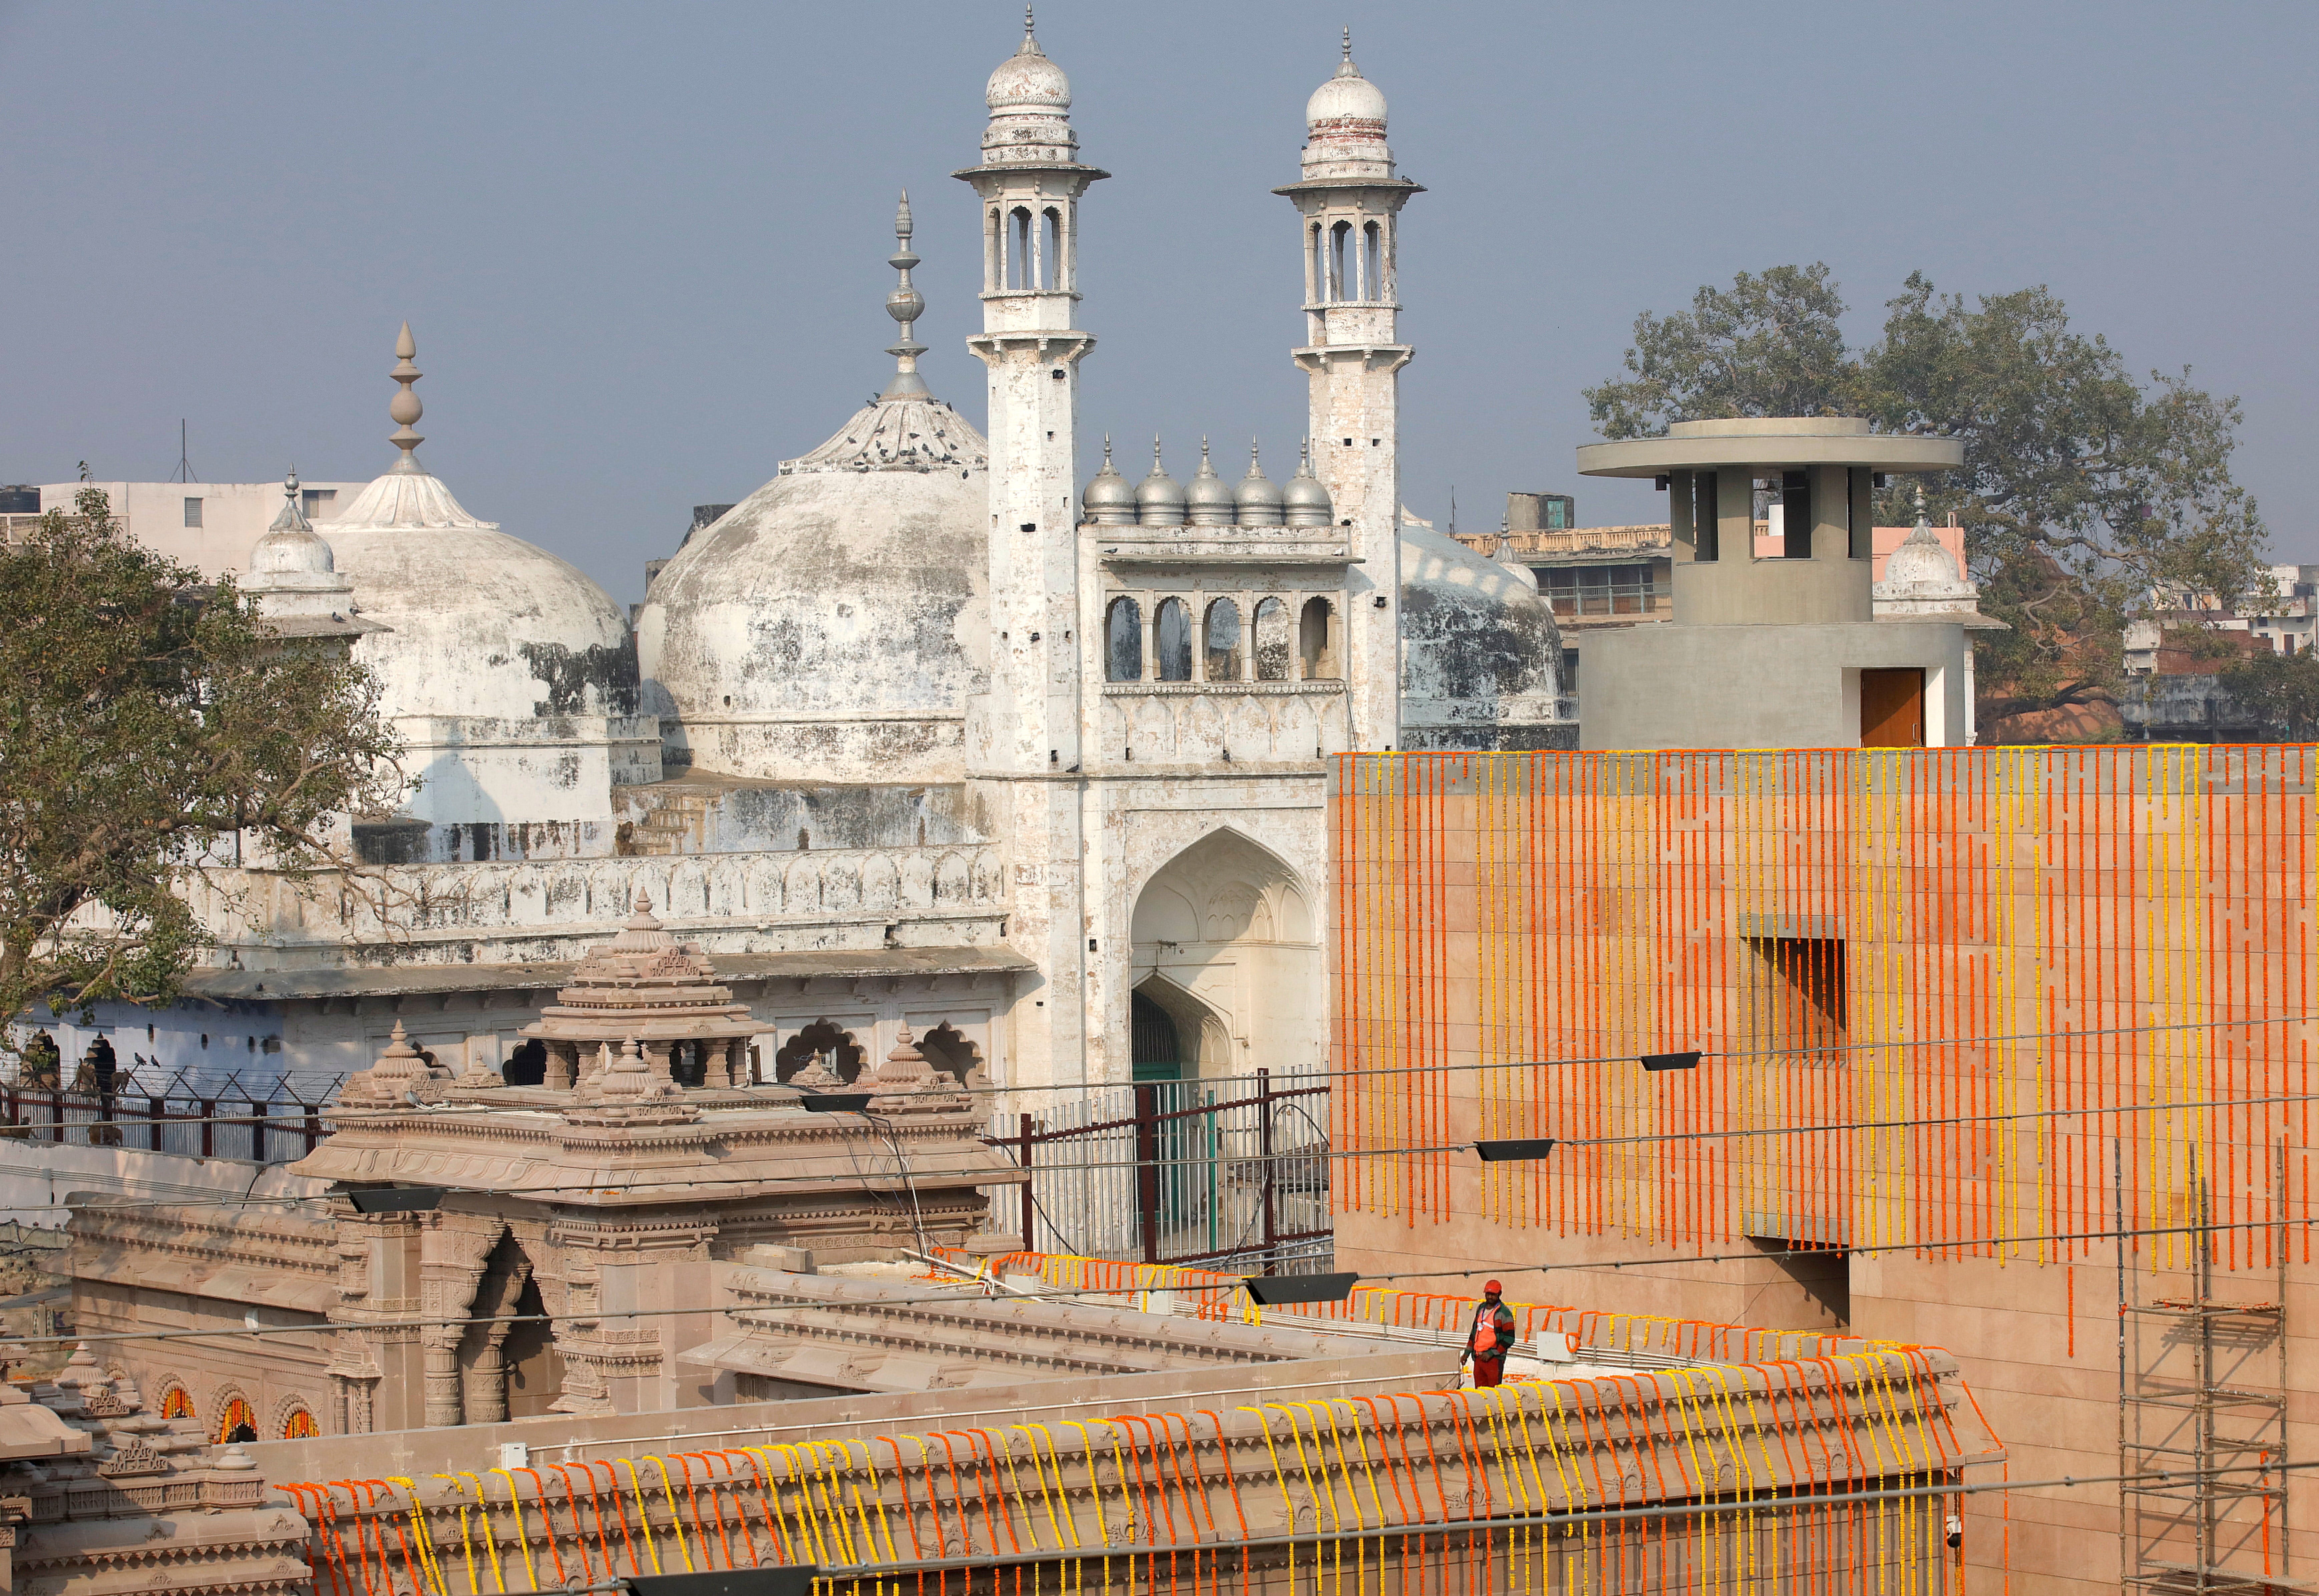 File photo: A worker stands on a temple rooftop adjacent to the Gyanvapi Mosque in the northern city of Varanasi